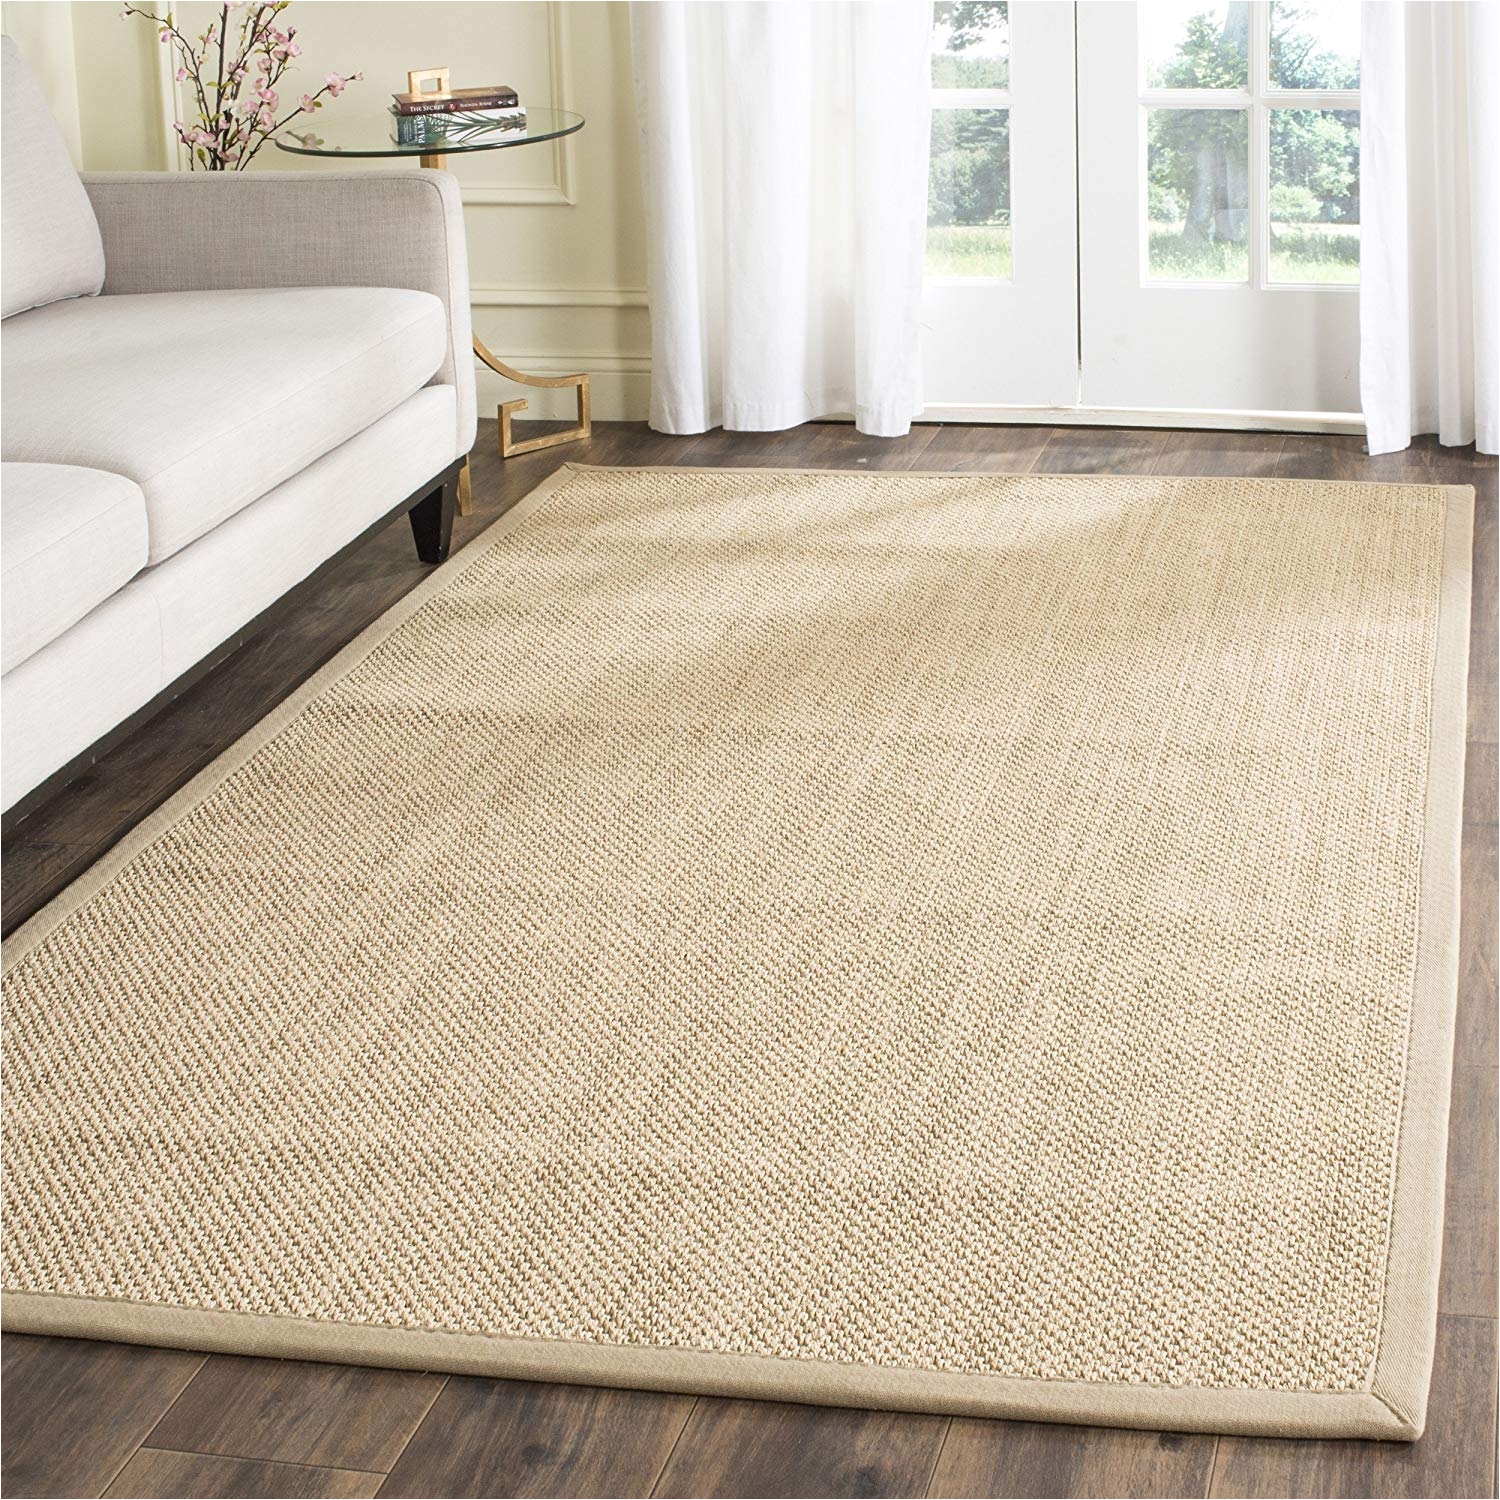 amazon com safavieh natural fiber collection nf141b tiger paw weave maize and linen sisal area rug 2 x 3 kitchen dining